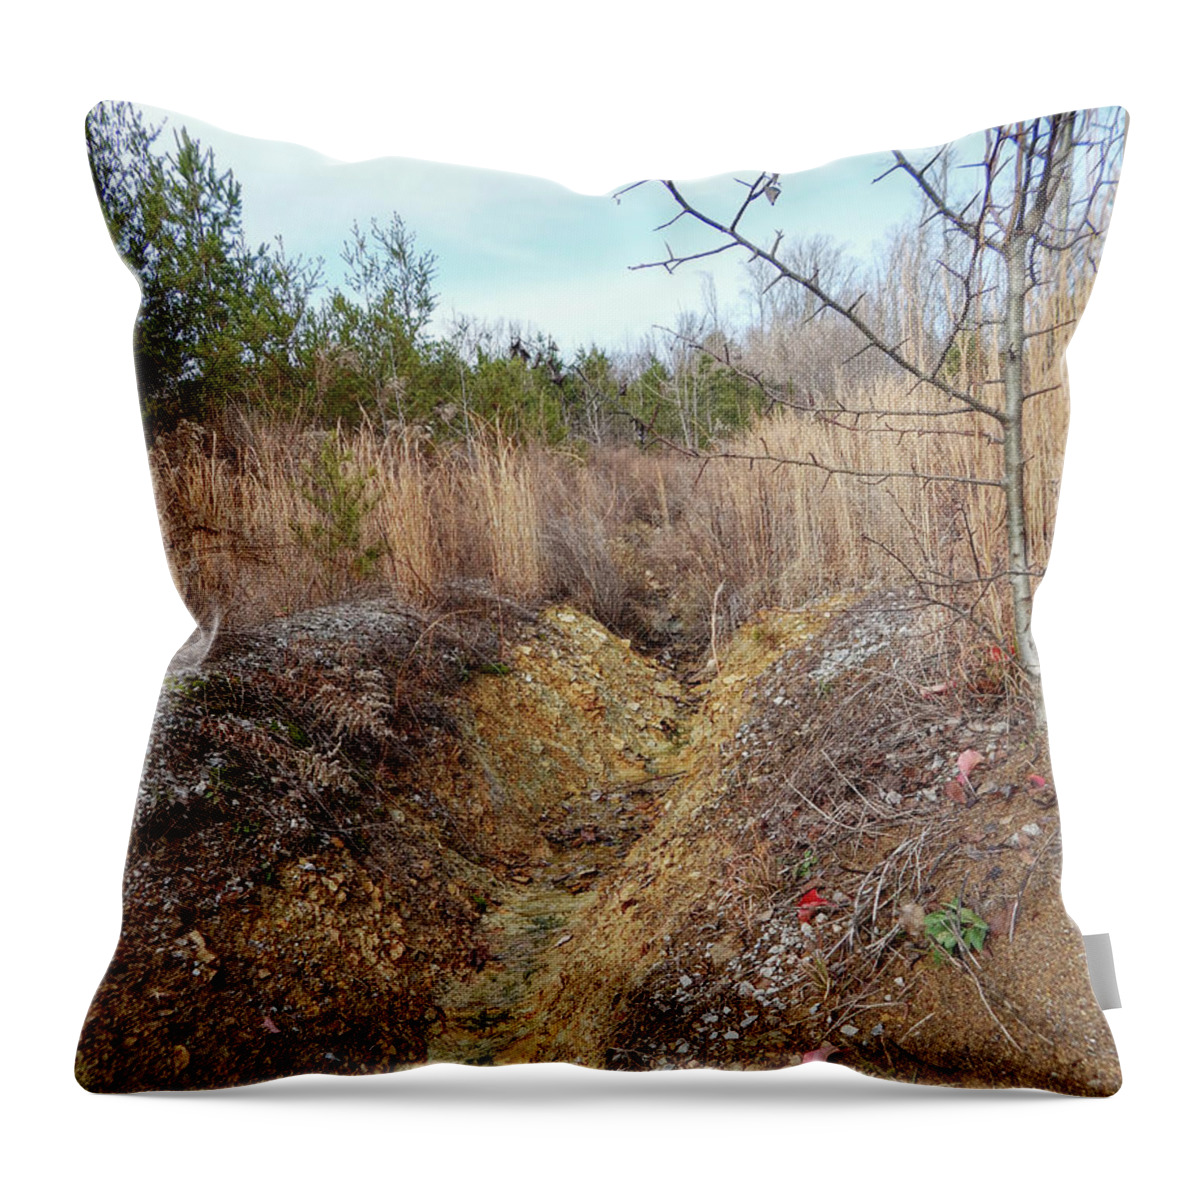 Hill Throw Pillow featuring the photograph Hillside Ravine by Phil Perkins